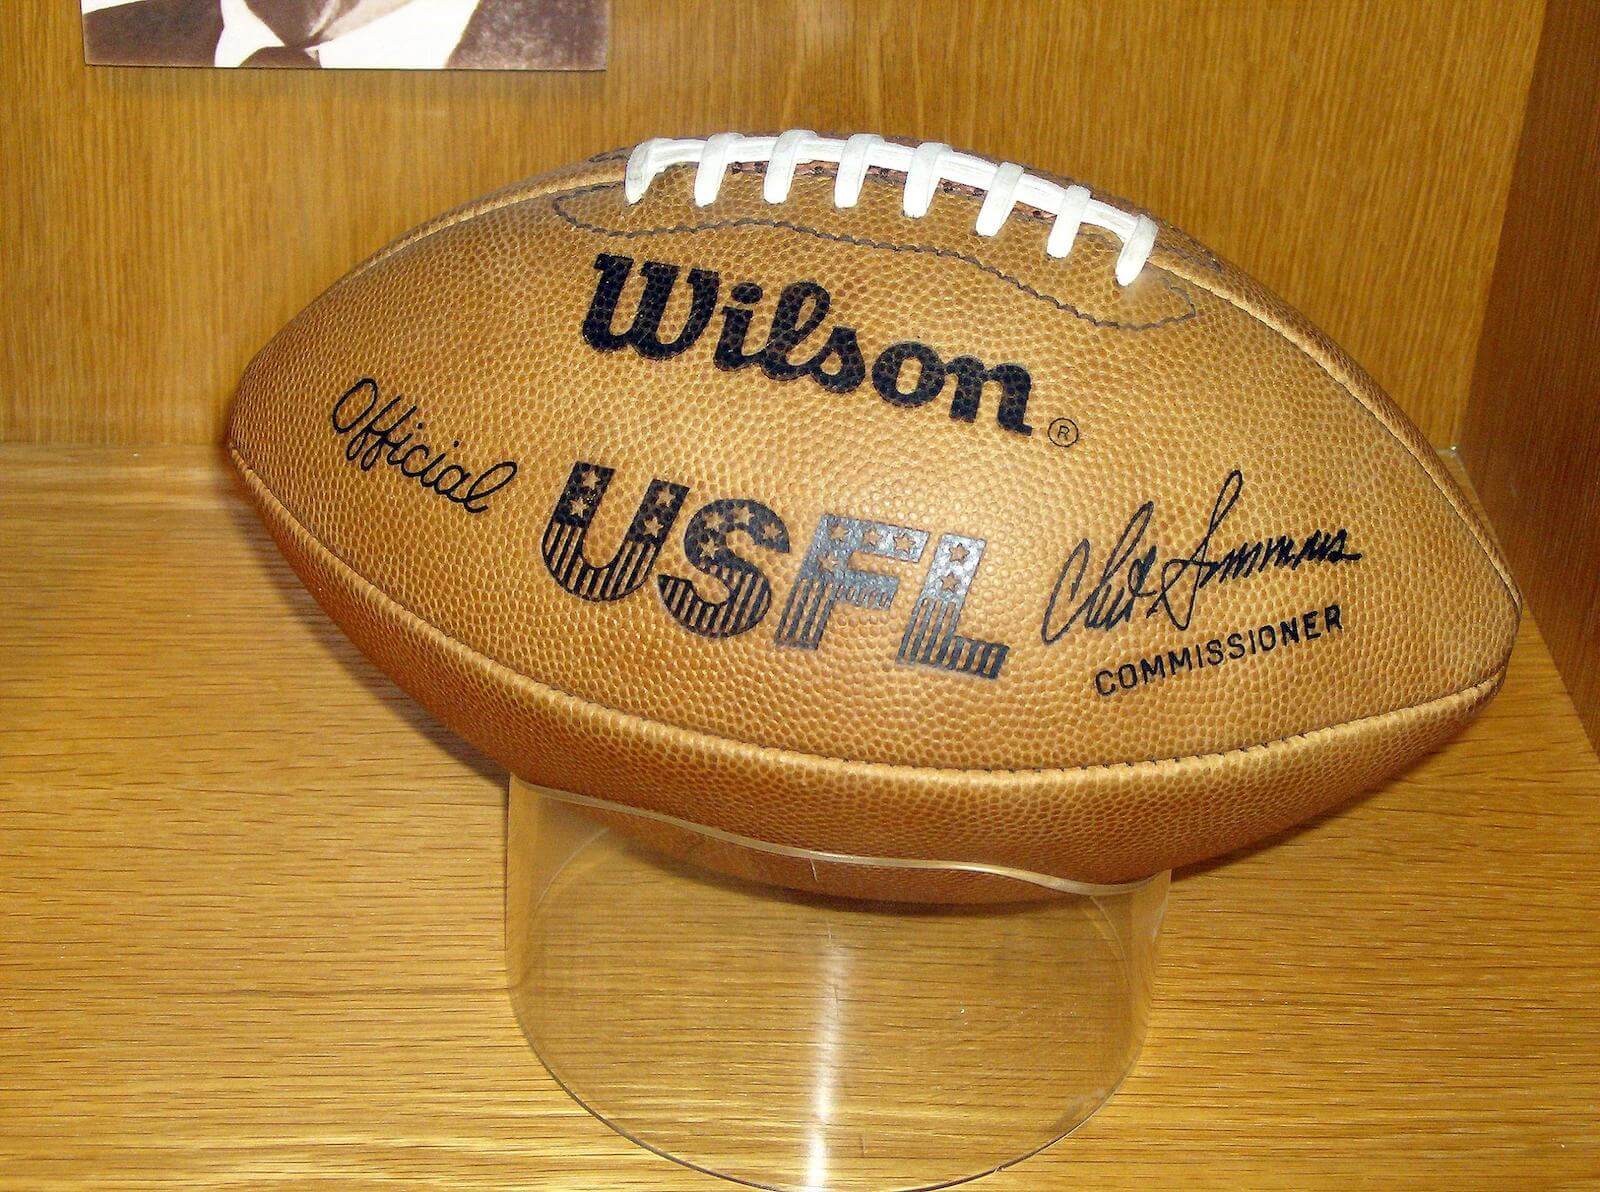 usfl players from nfl